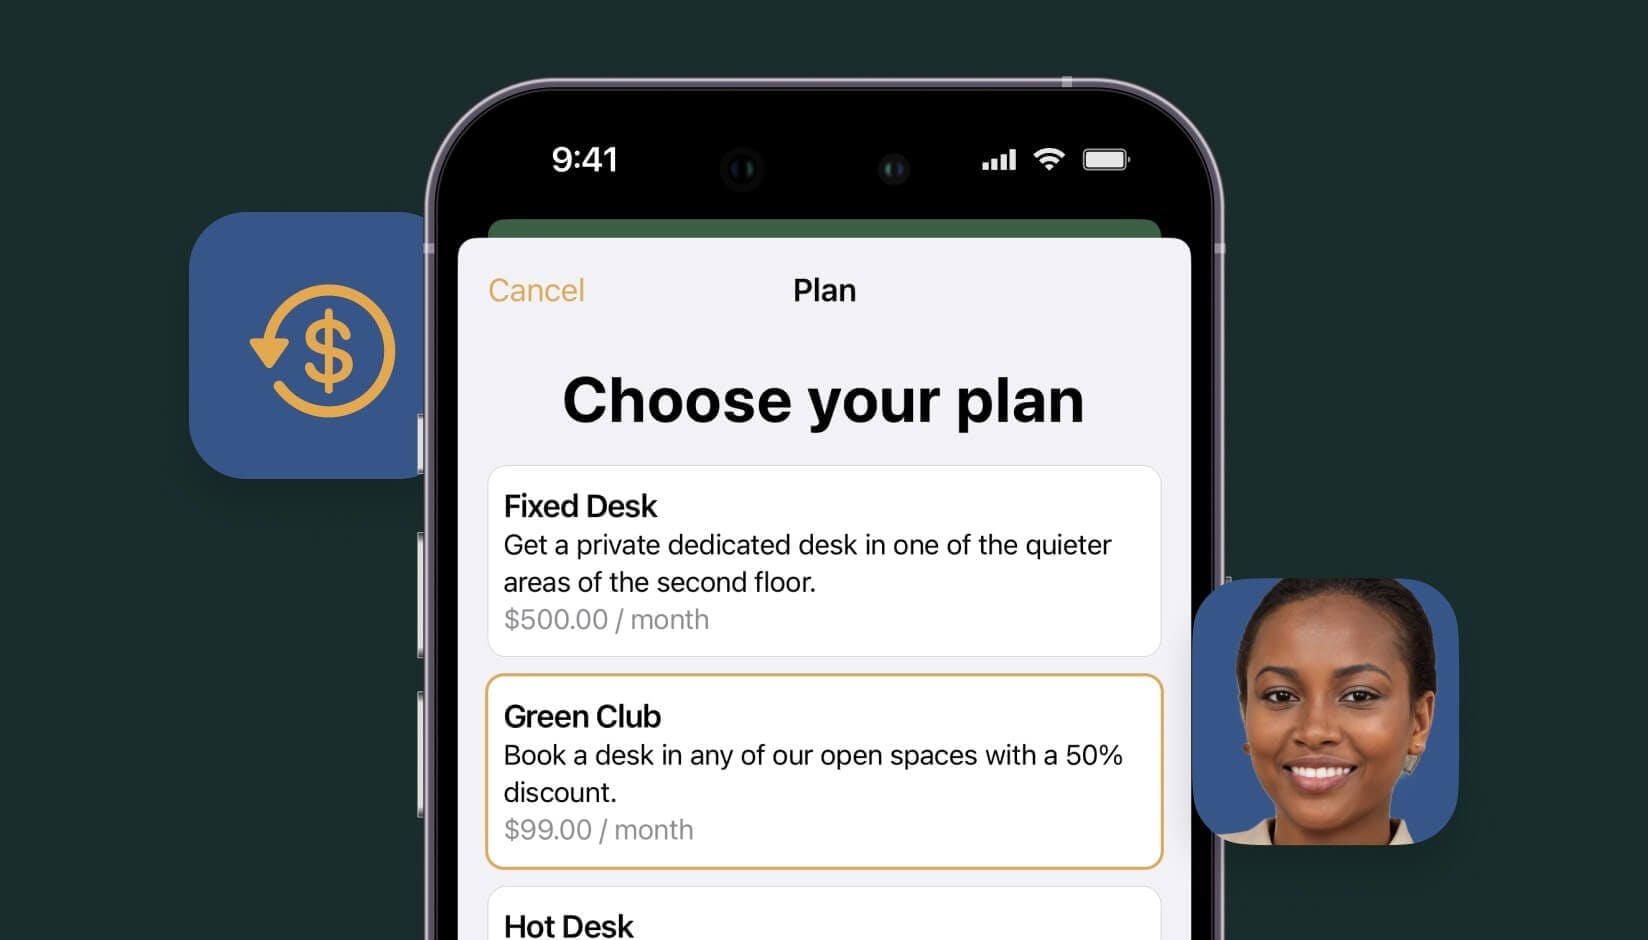 Introducing Sign-Up for Plans